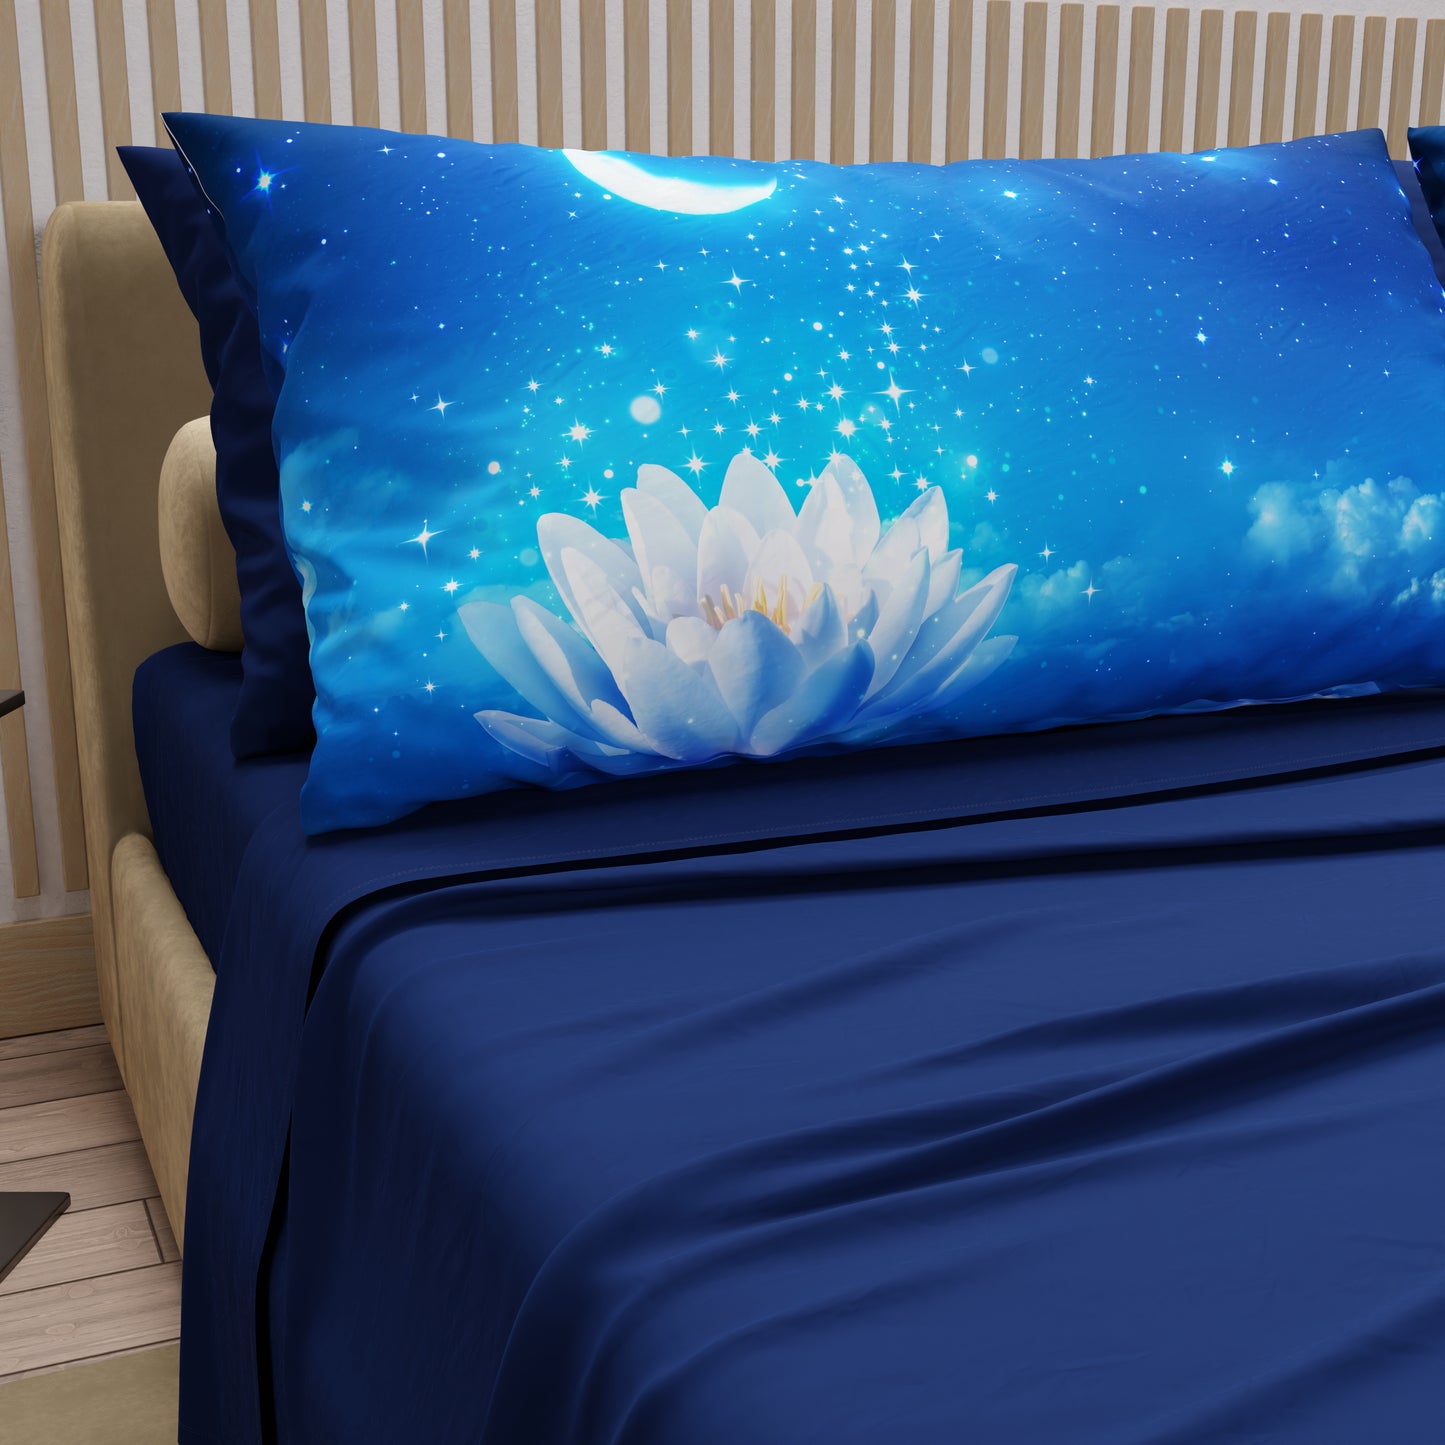 Cotton Sheets, Bed Set with Starry Night Digital Print Pillowcases